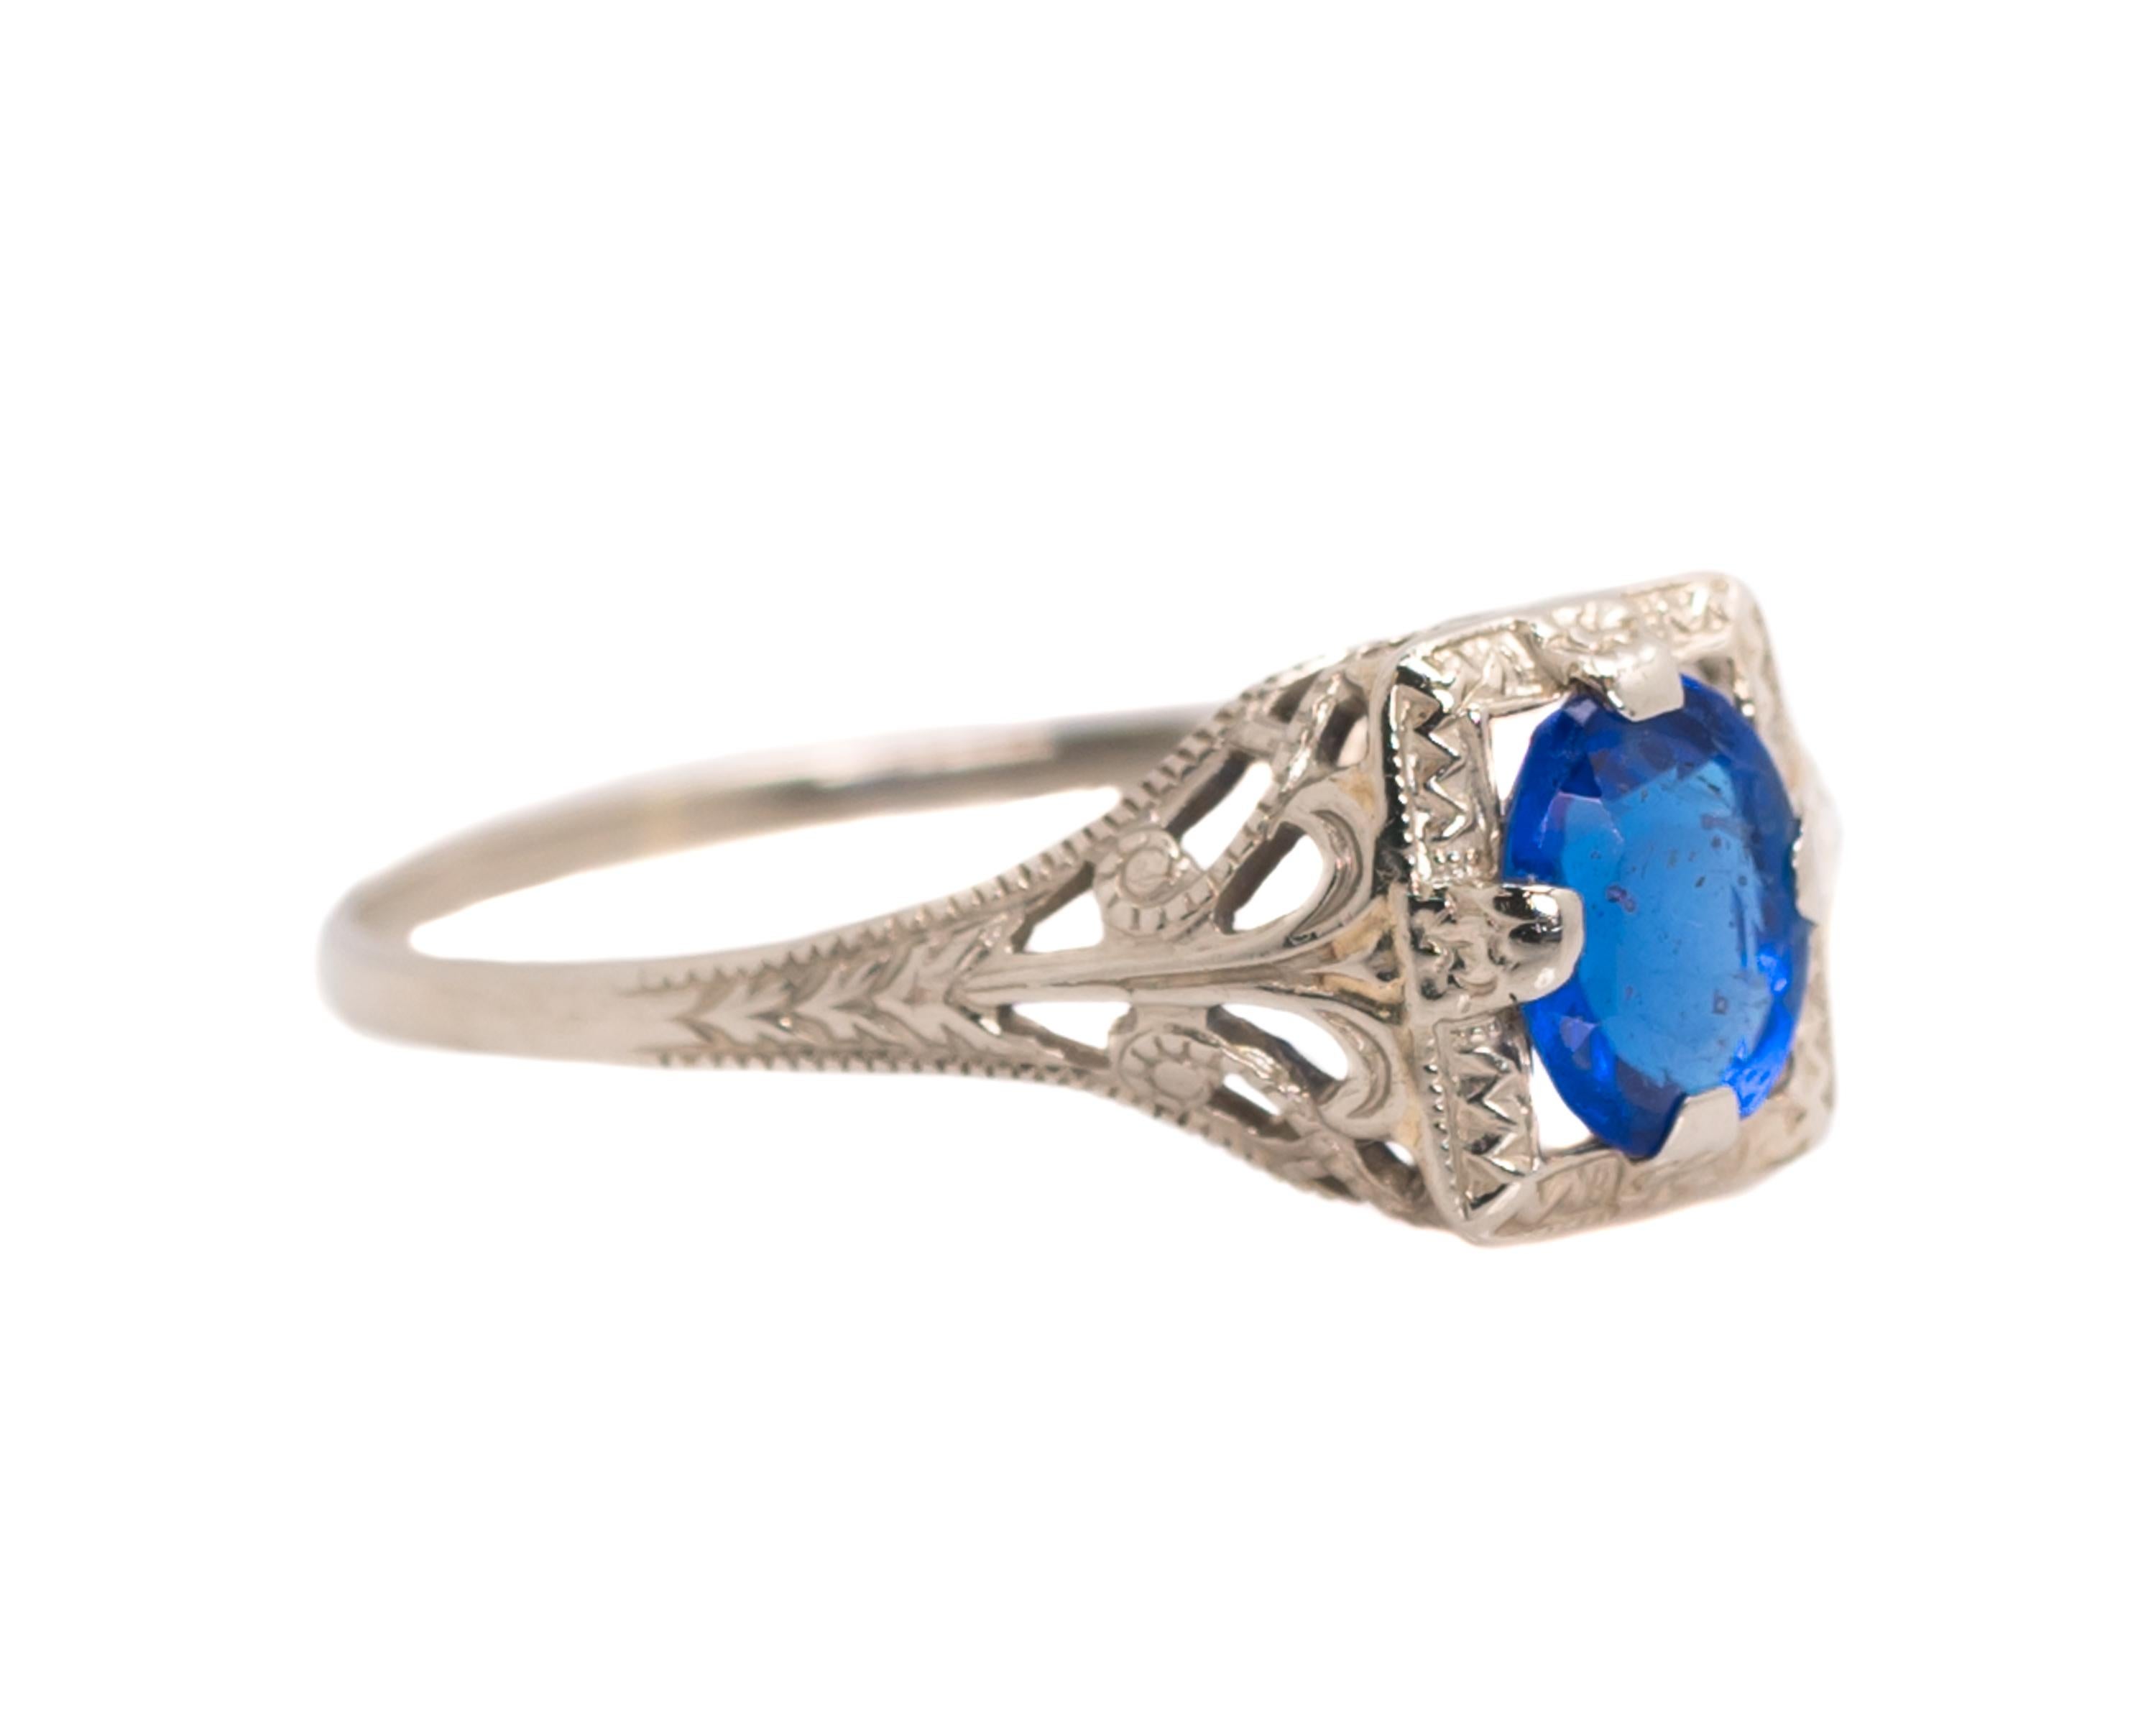 1920s Art Deco Blue Sapphire Ring - 10k White Gold, Simulated Blue Sapphire

Features:
Oval Center Stone in a Square Setting
10 Karat White Gold Filigree Setting with Open Gallery and Shoulders
Fine milgrain detail along the upper and lower edges of